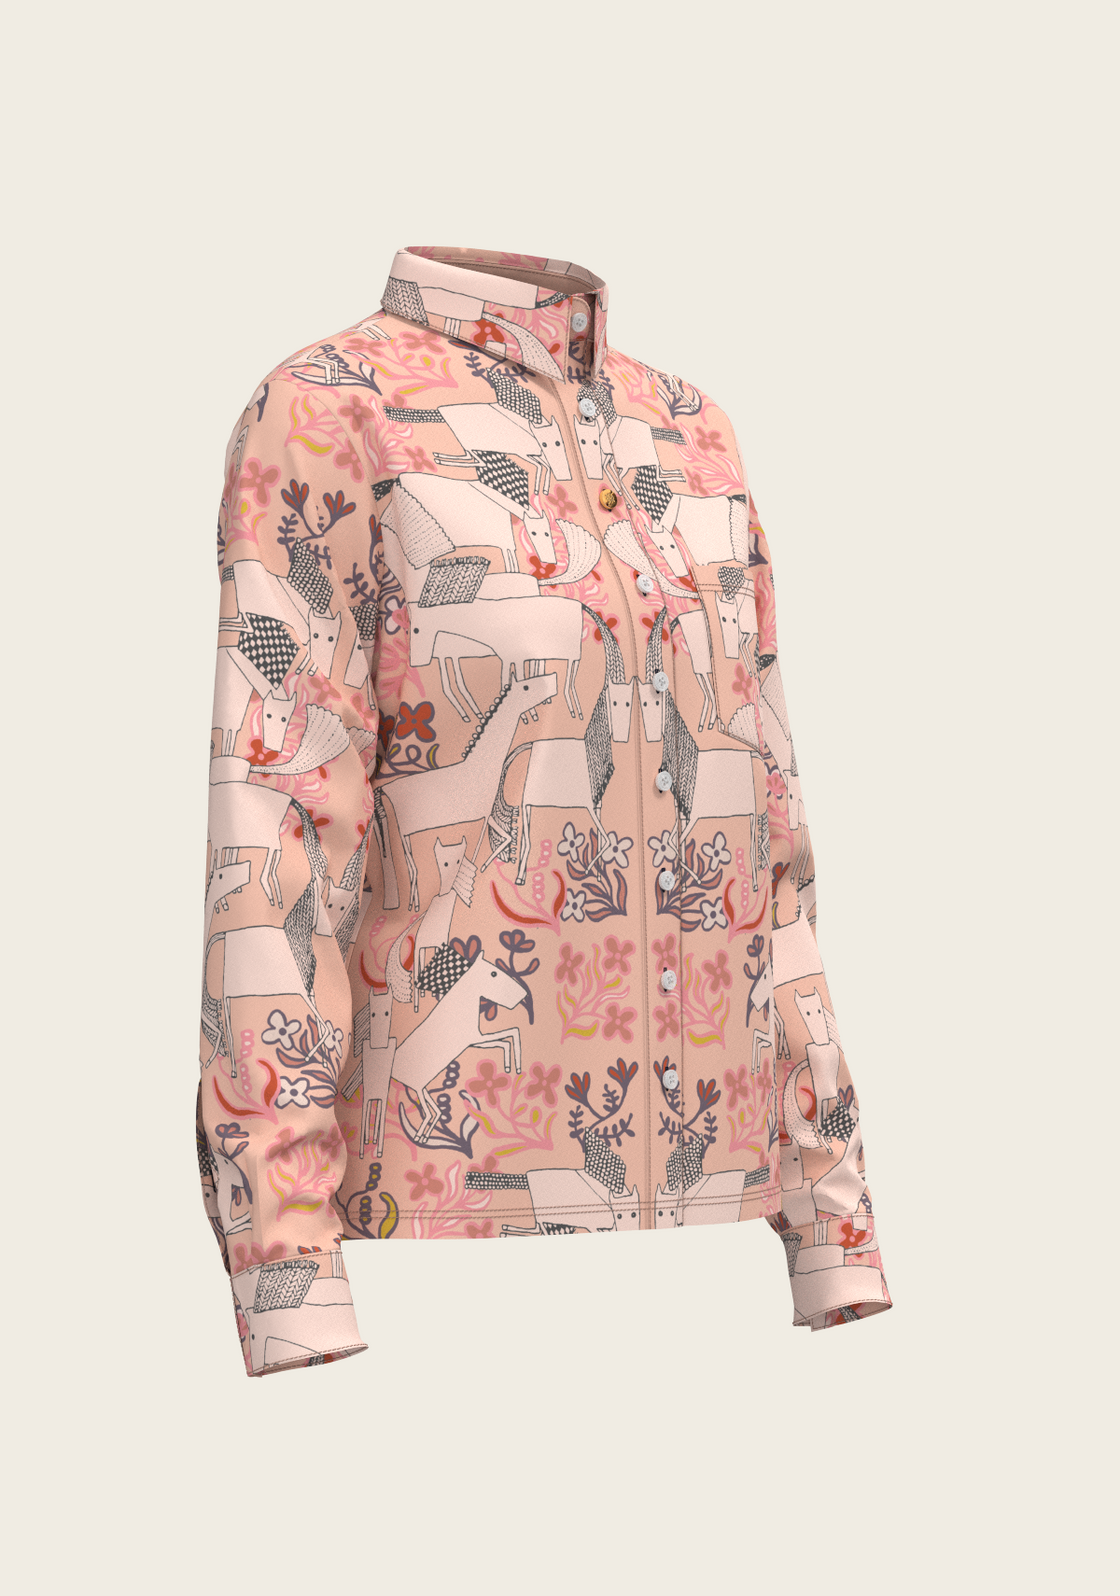  Maize on Peach Loose Fitting Button Shirt